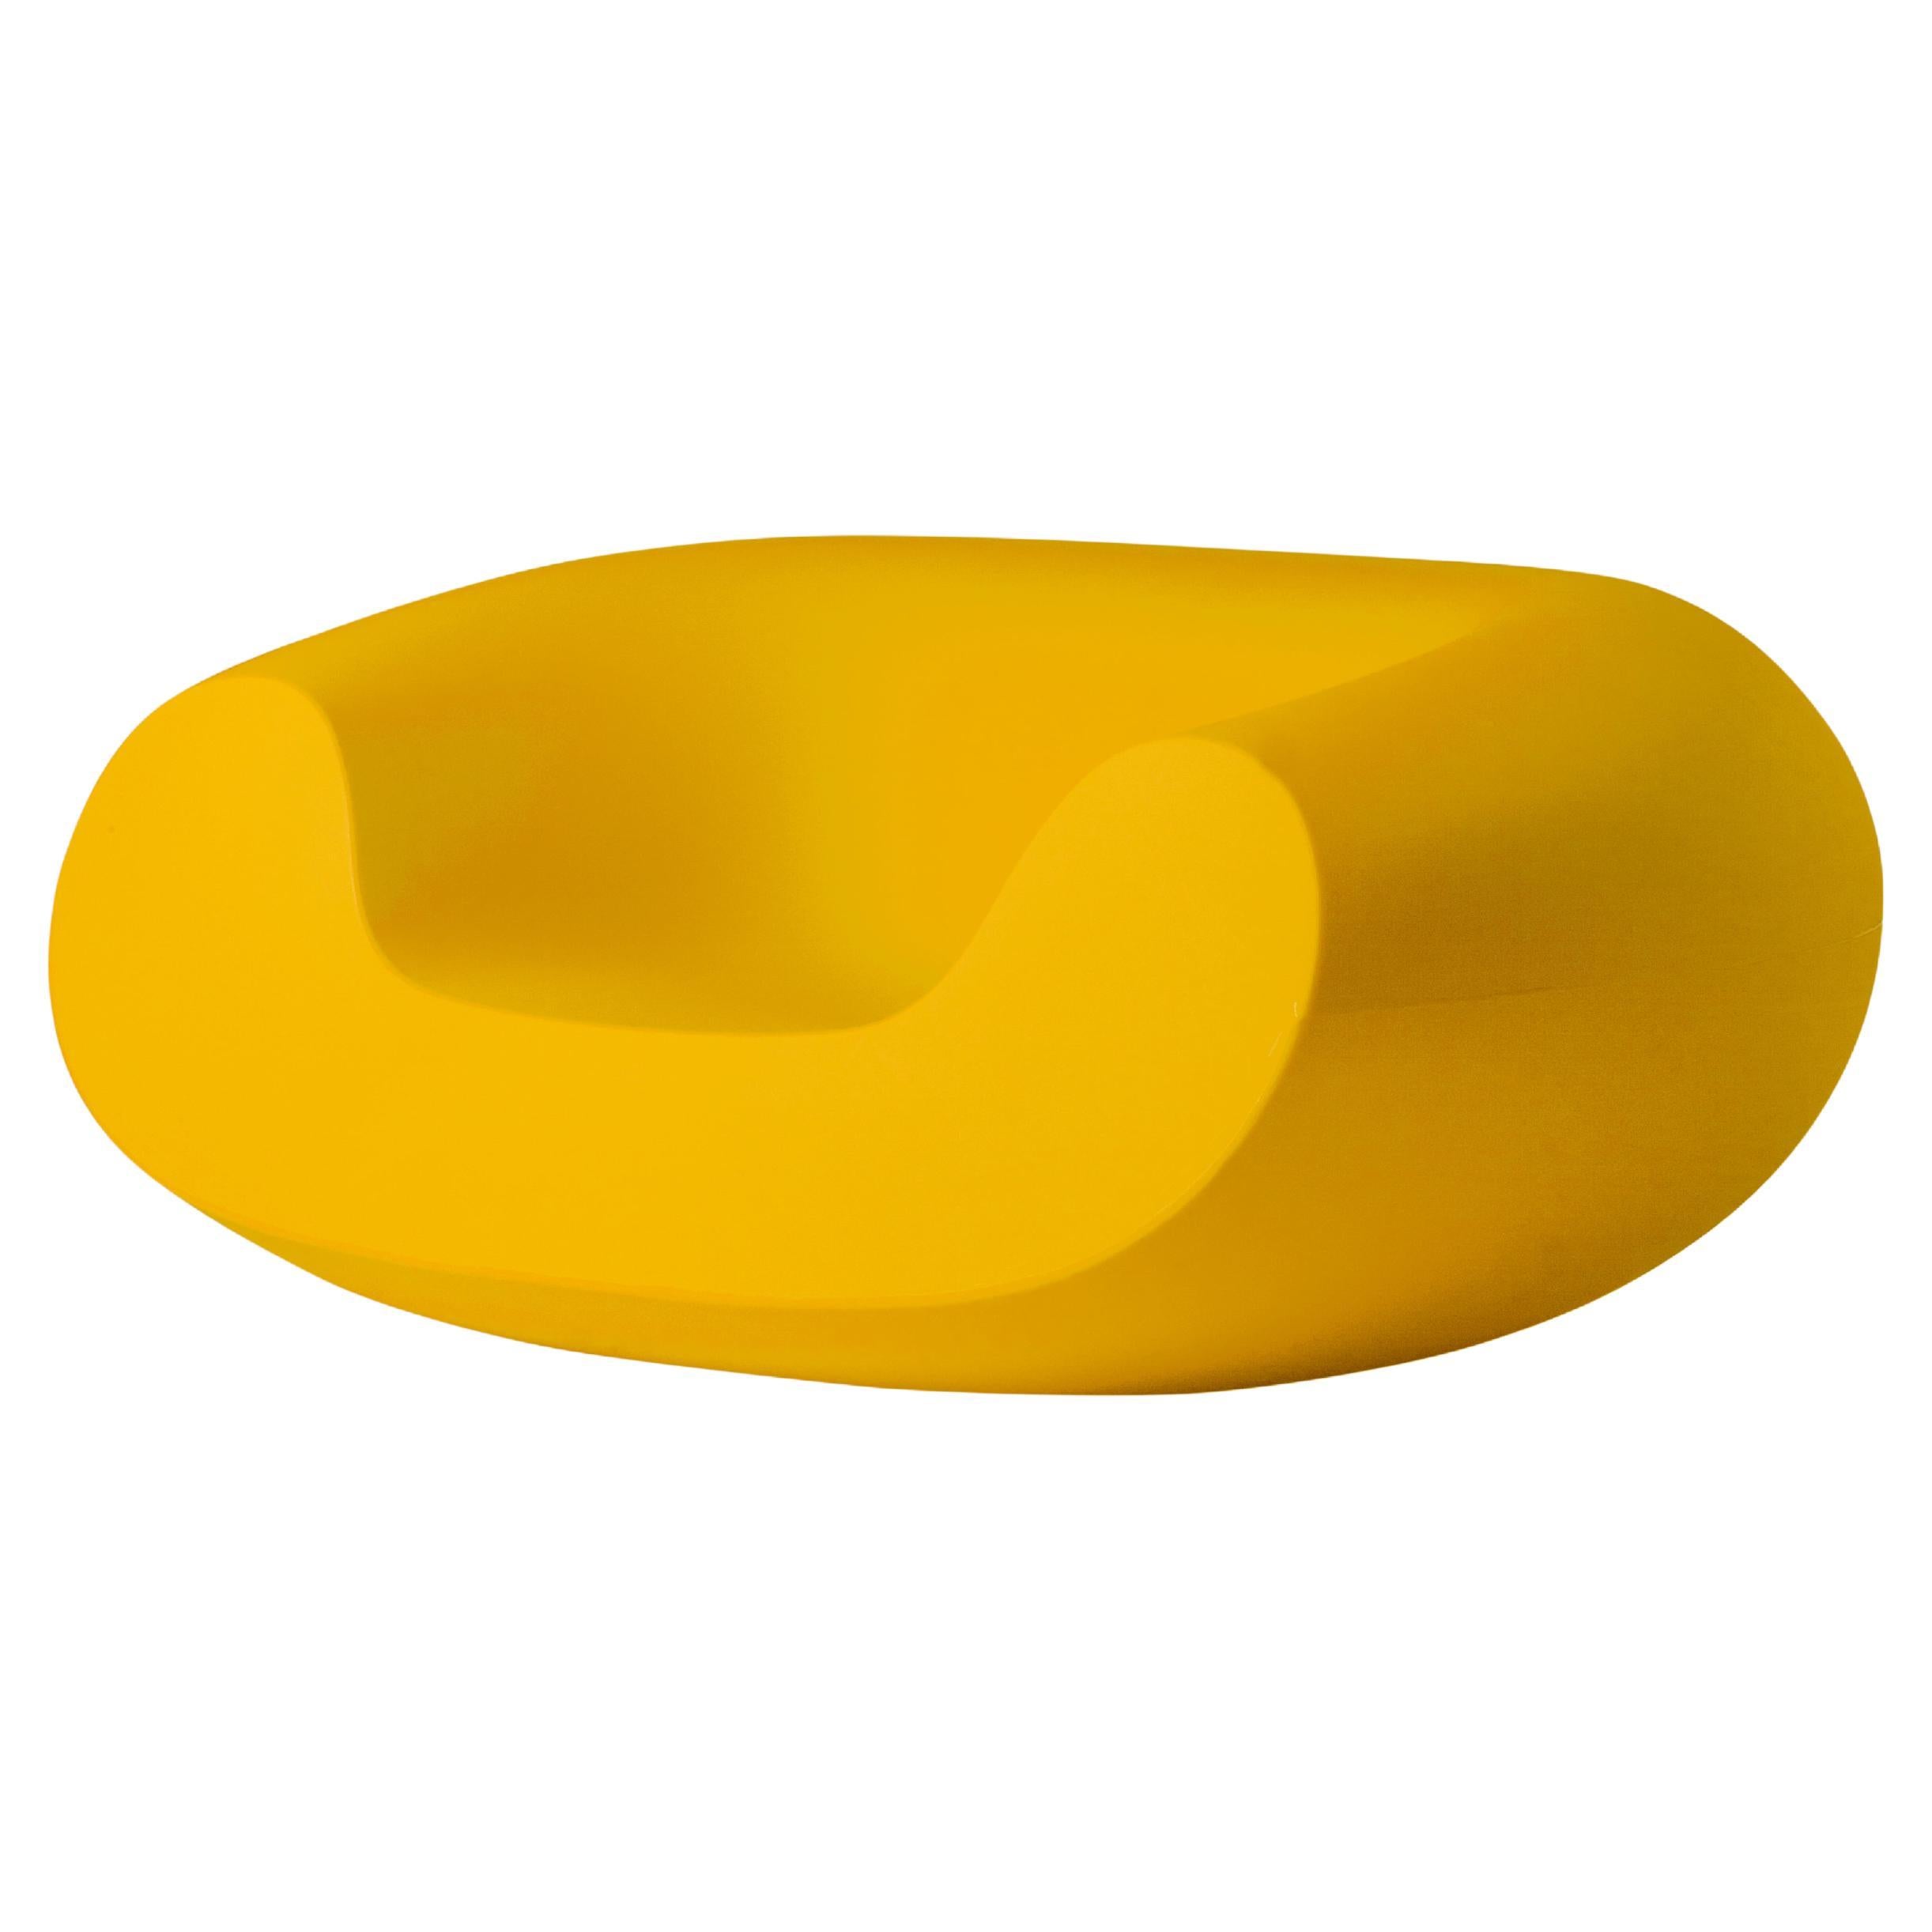 Slide Design Chubby Lounge Armchair in Saffron Yellow by Marcel Wanders For Sale